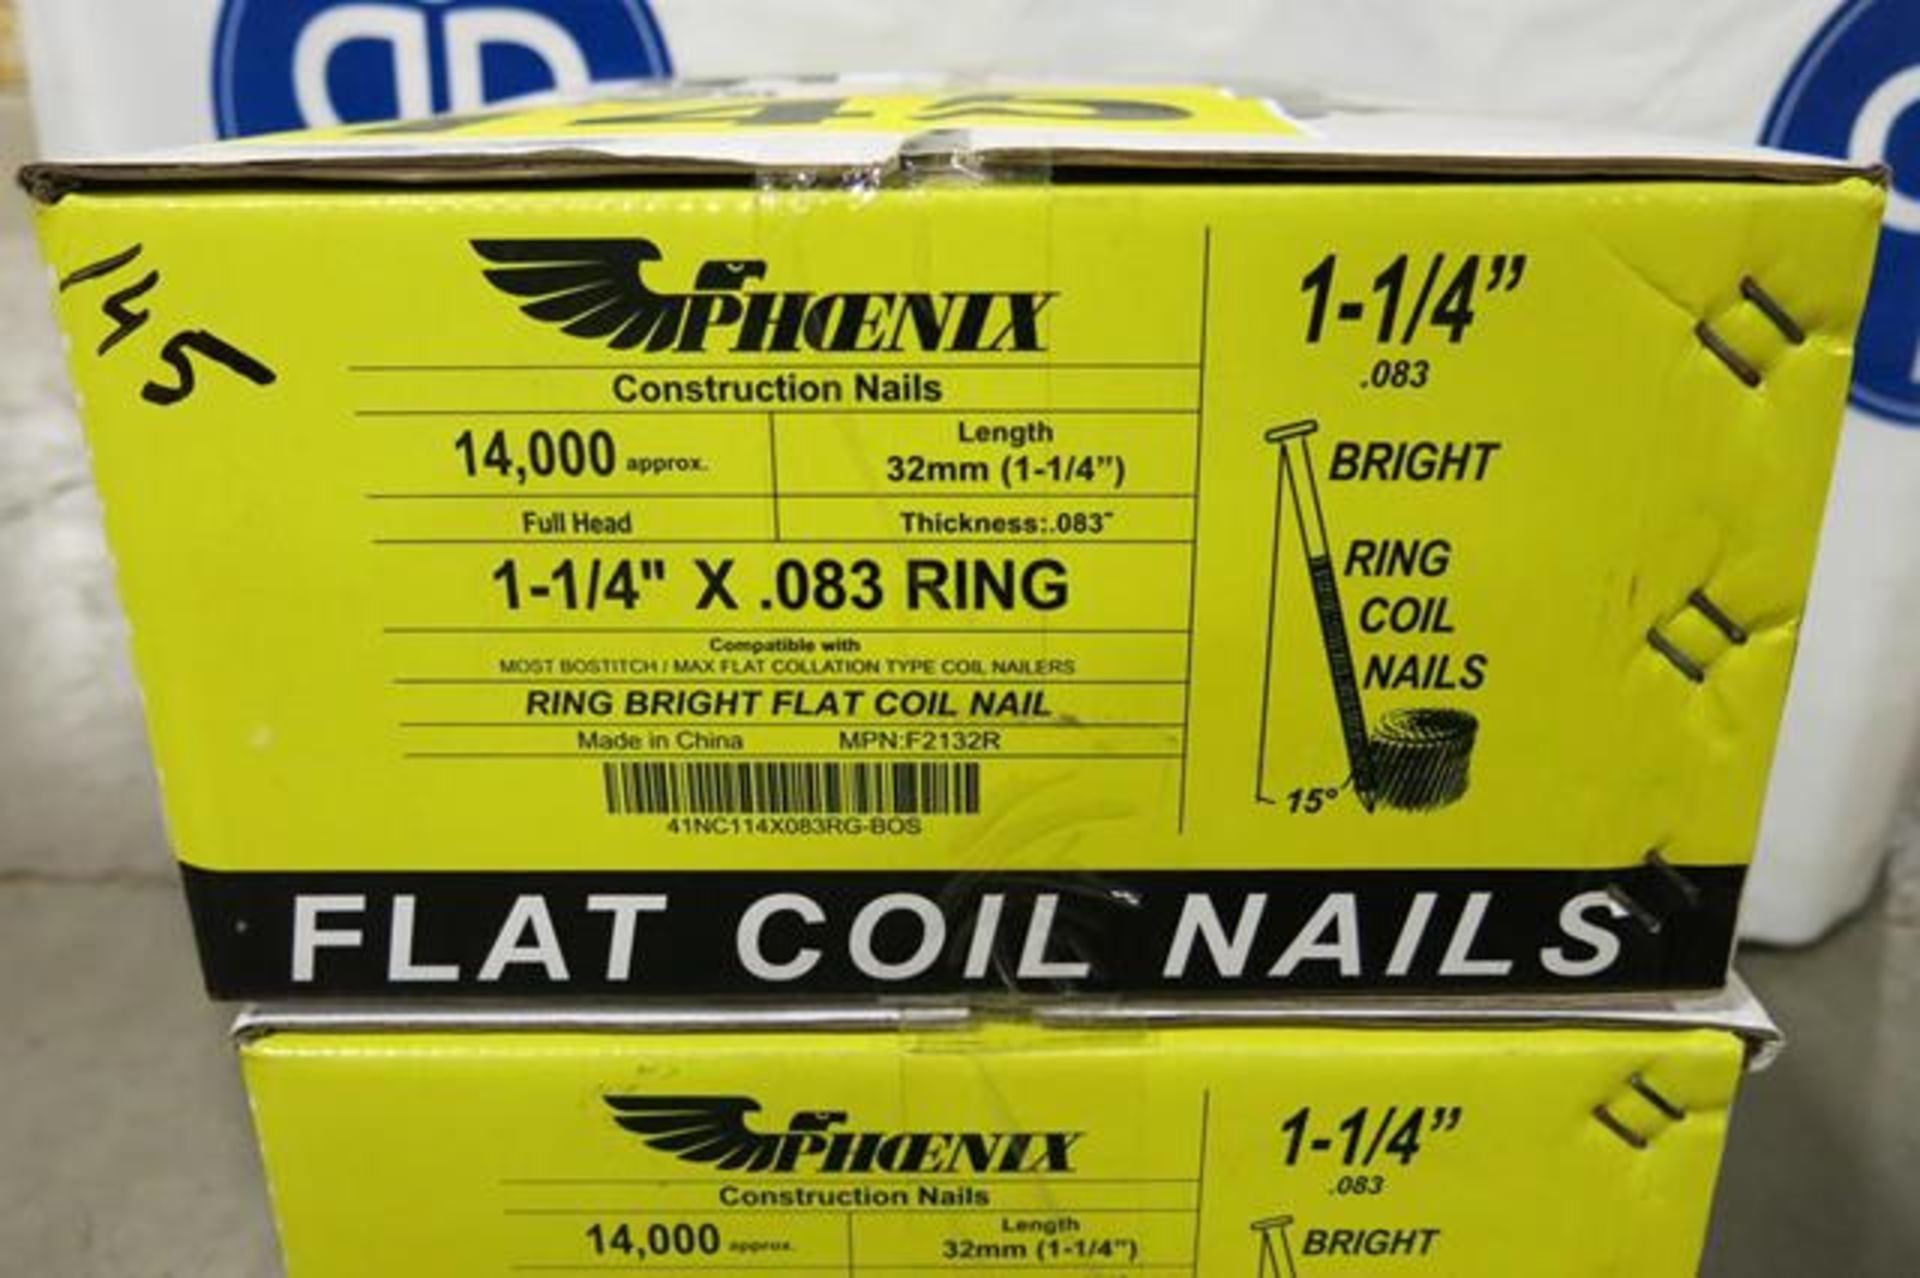 PHOENIX, 1.25" X 0.83 DIA, RING COIL NAILS, 1,400 APPROX. - NEW - Image 2 of 2